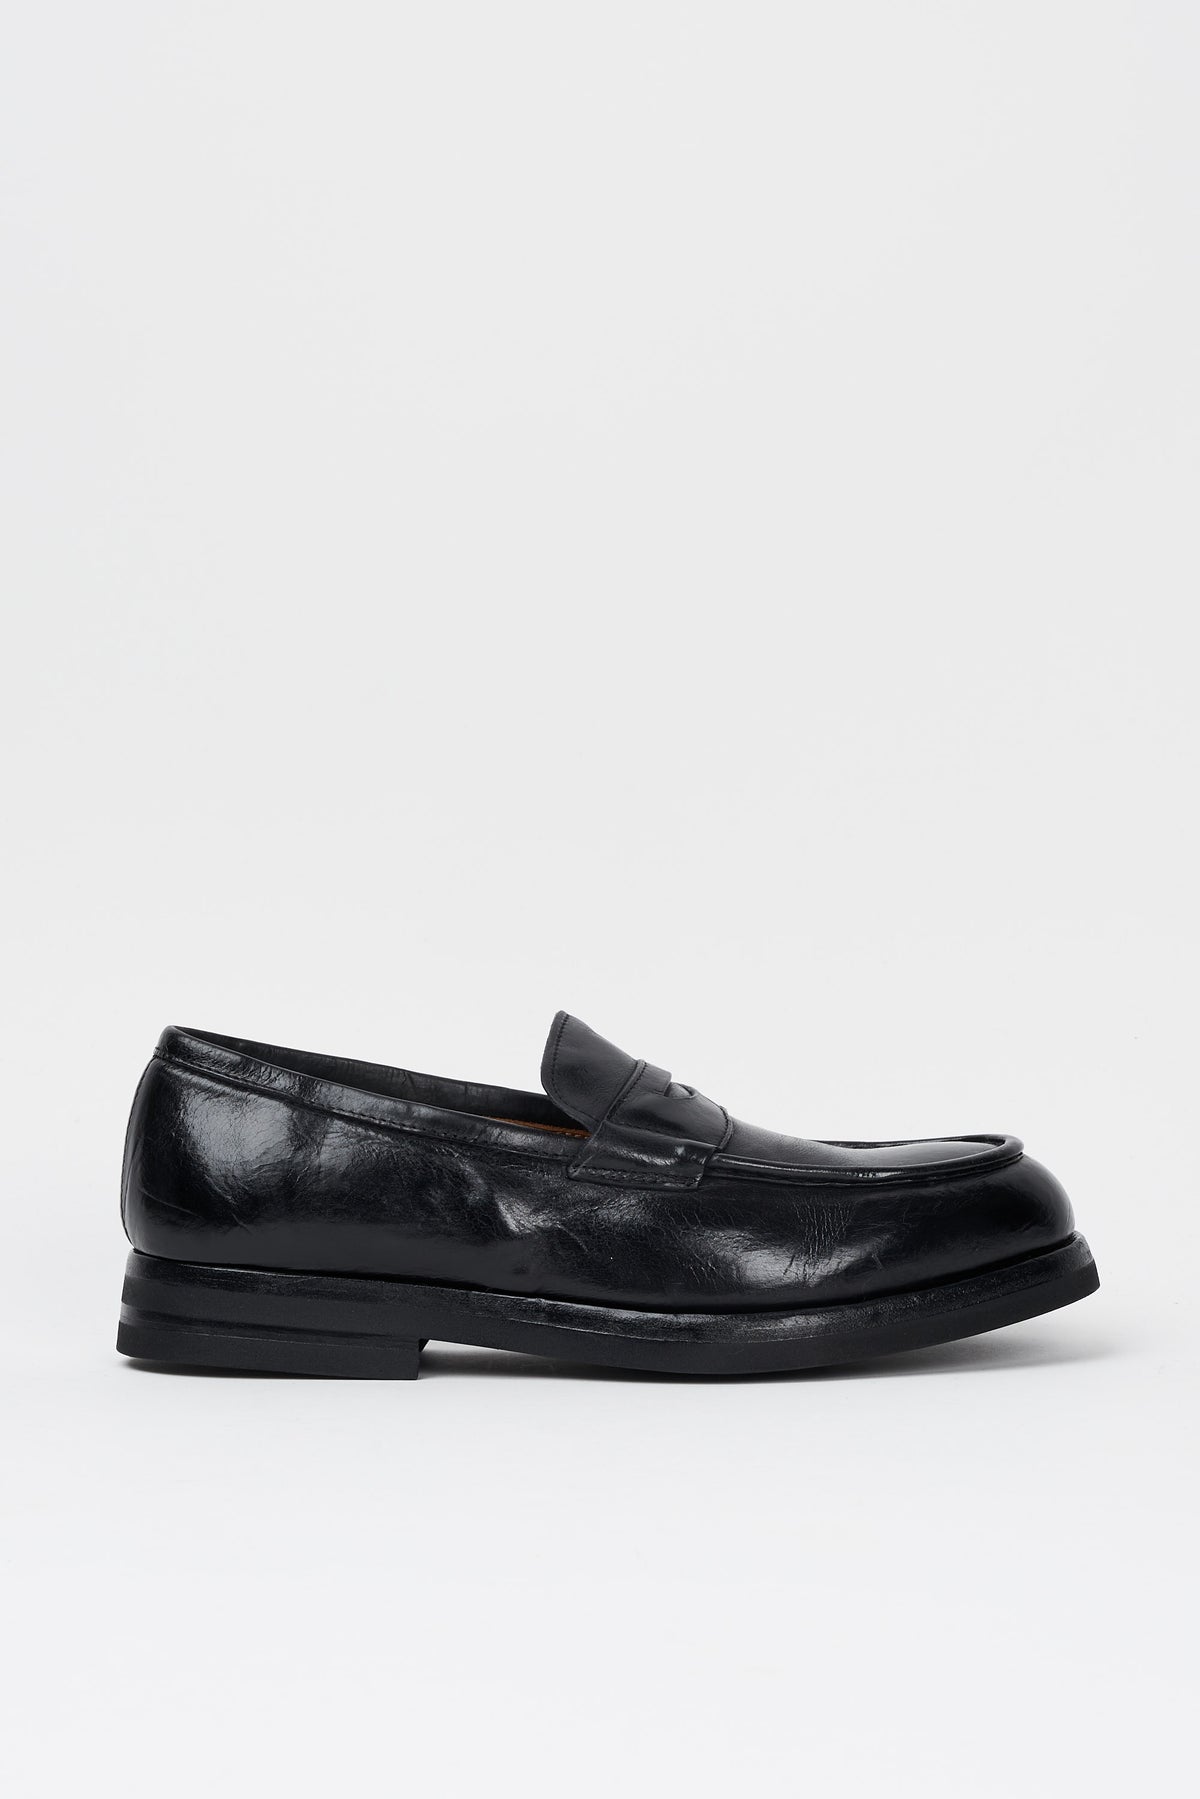 Green George Black Leather Loafer